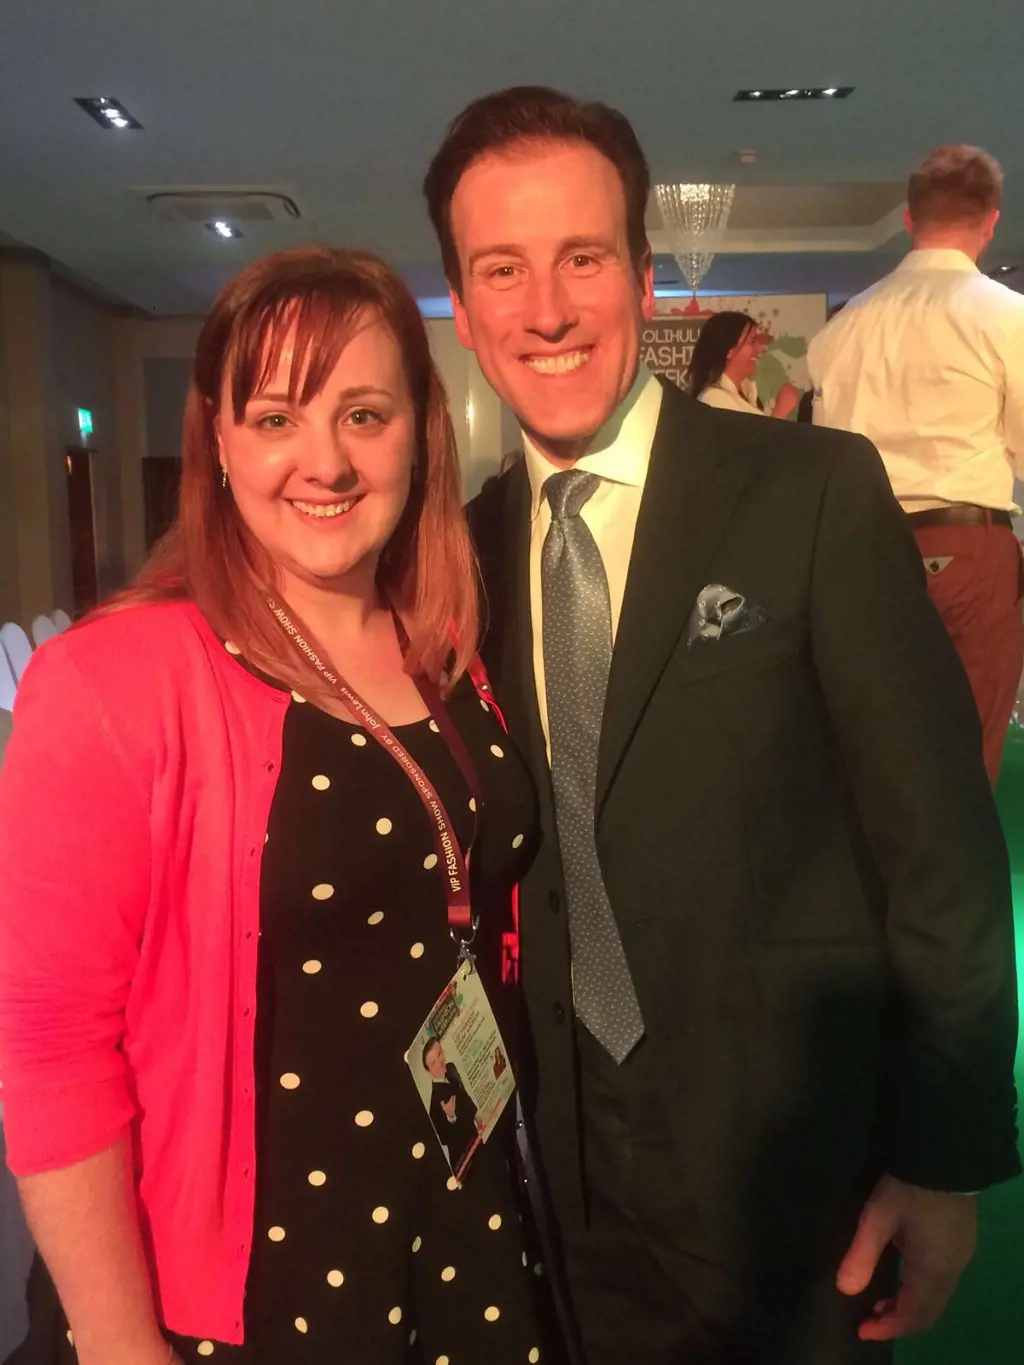 Beth met lovely judge Anton Du Beke on April 22, 2016, in Solihull. She is a Charity worker, Dance teacher, cub scout leader, and choreographer. Picture: Steps Dance Academy